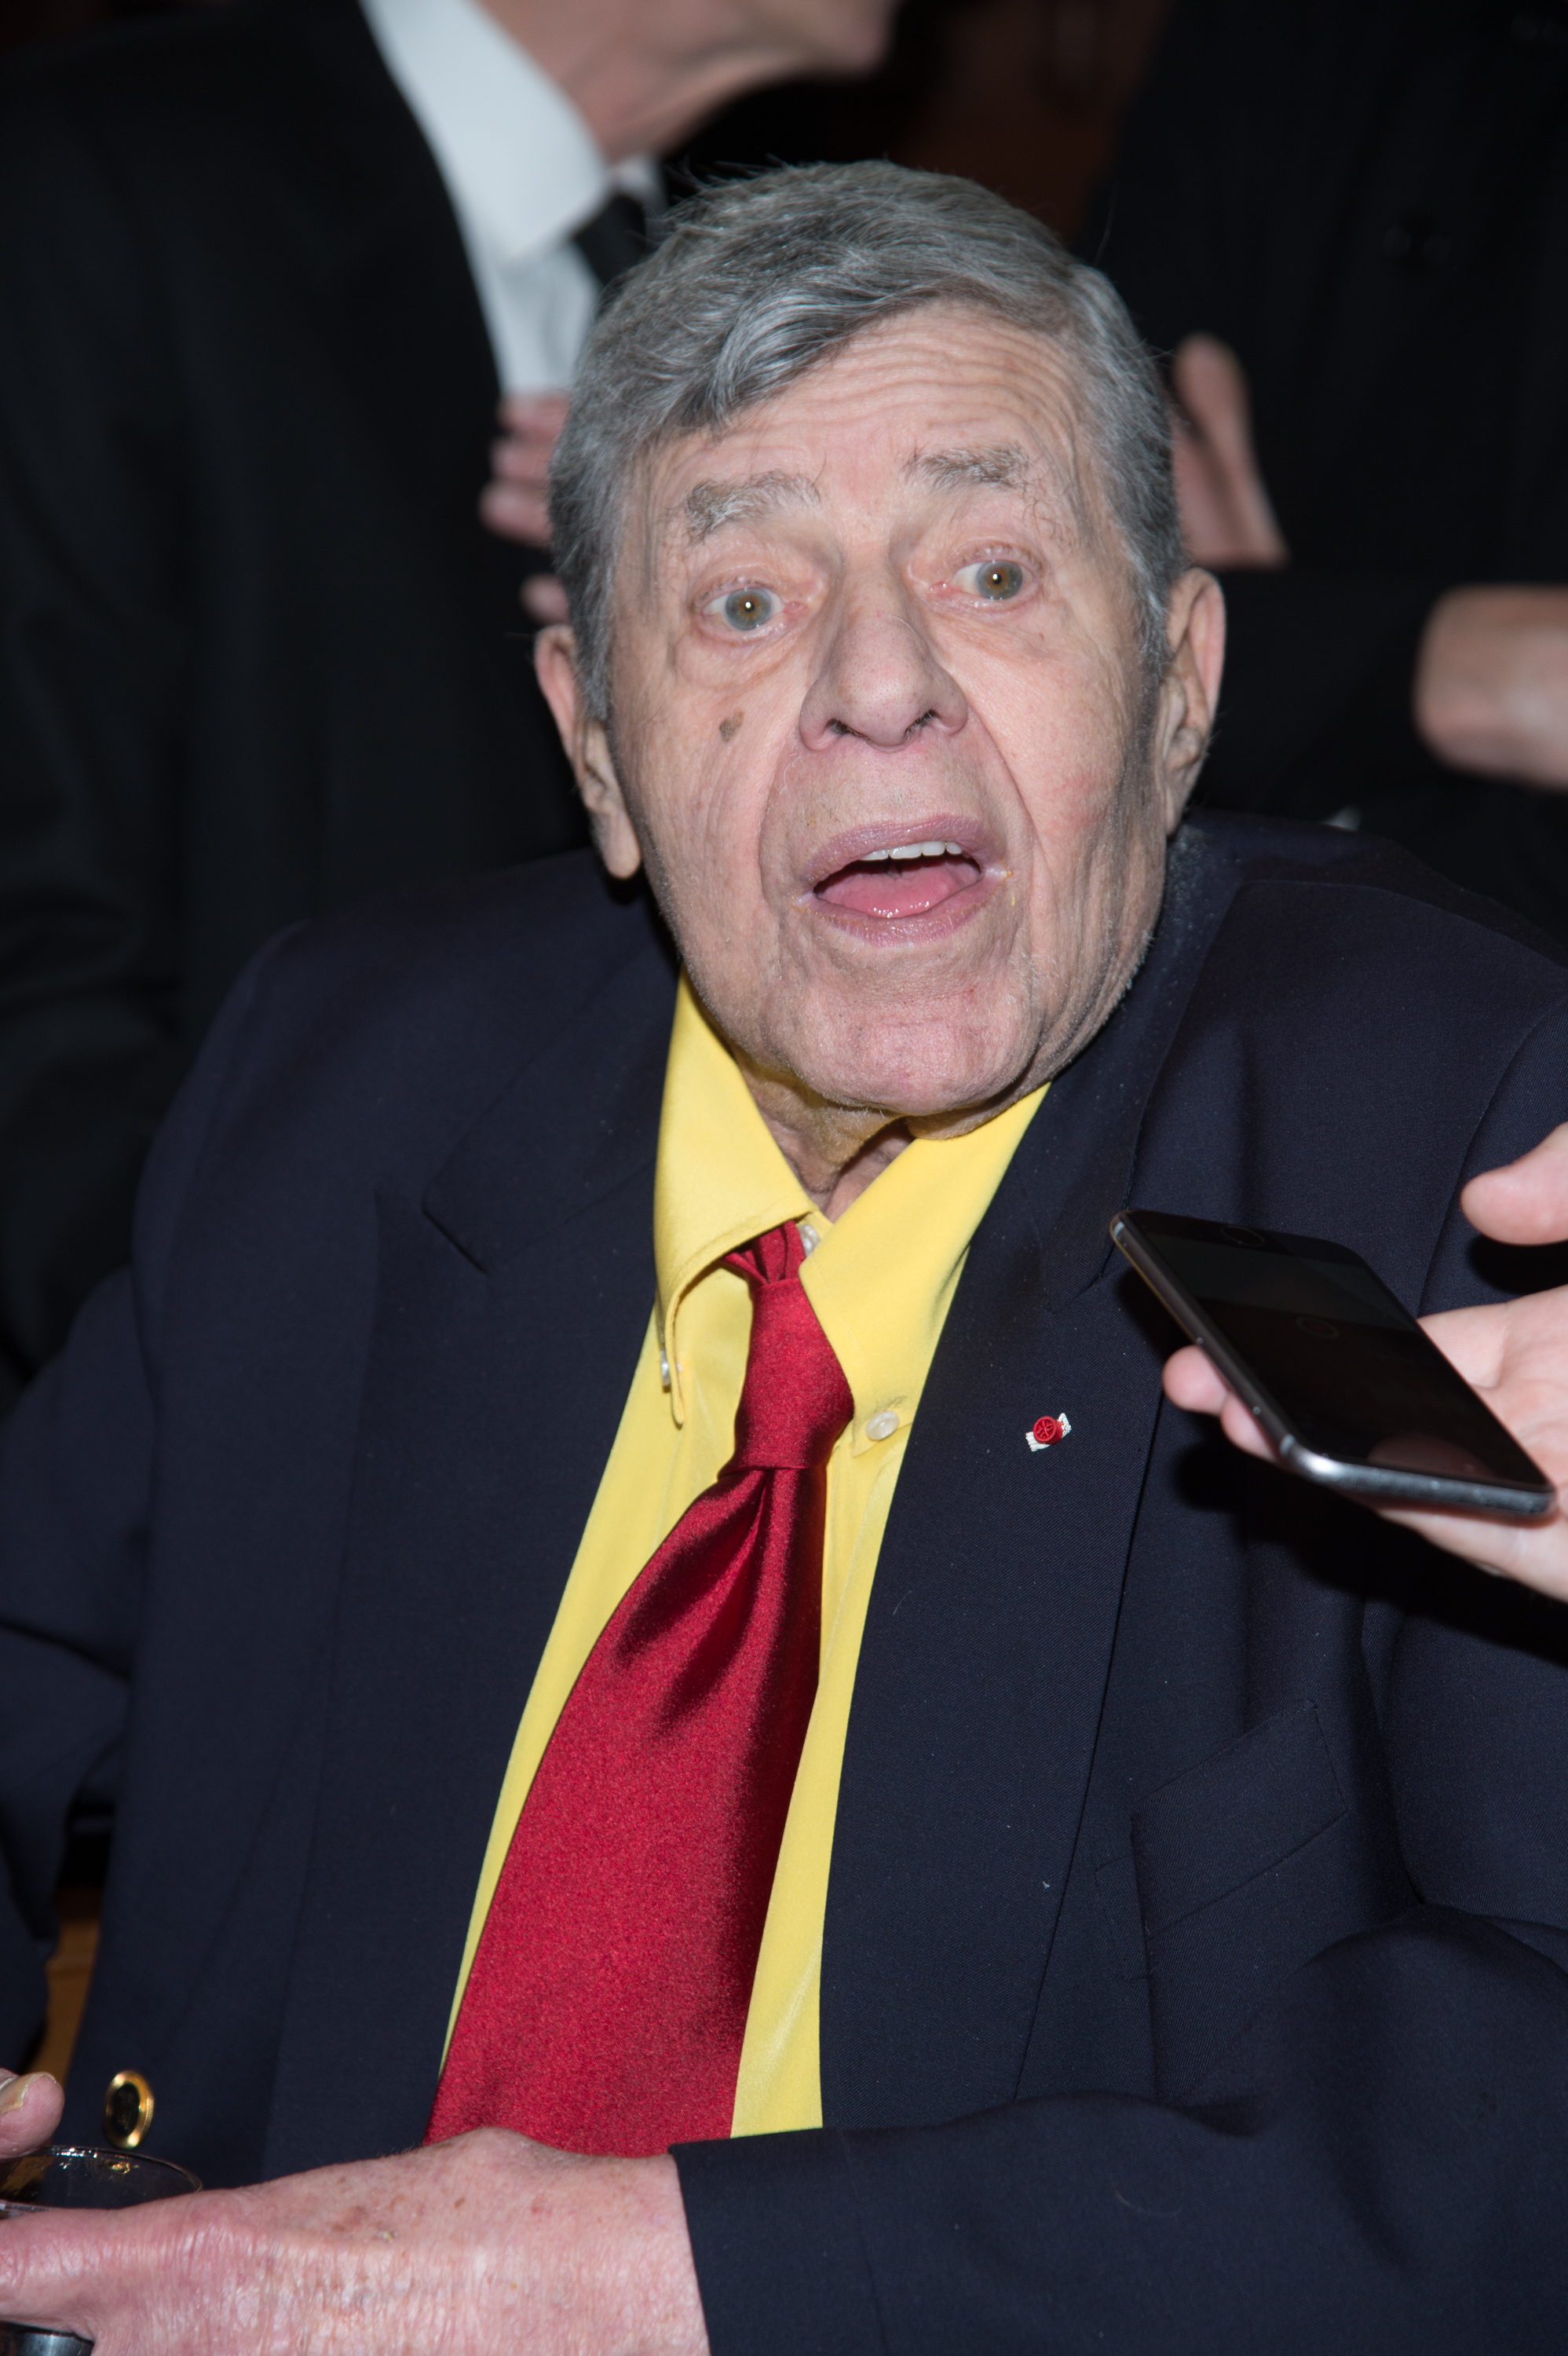 Comedian Jerry Lewis attends the 90th Birthday of Jerry Lewis at The Friars Club on April 8, 2016 in New York City. | Source: Getty Images